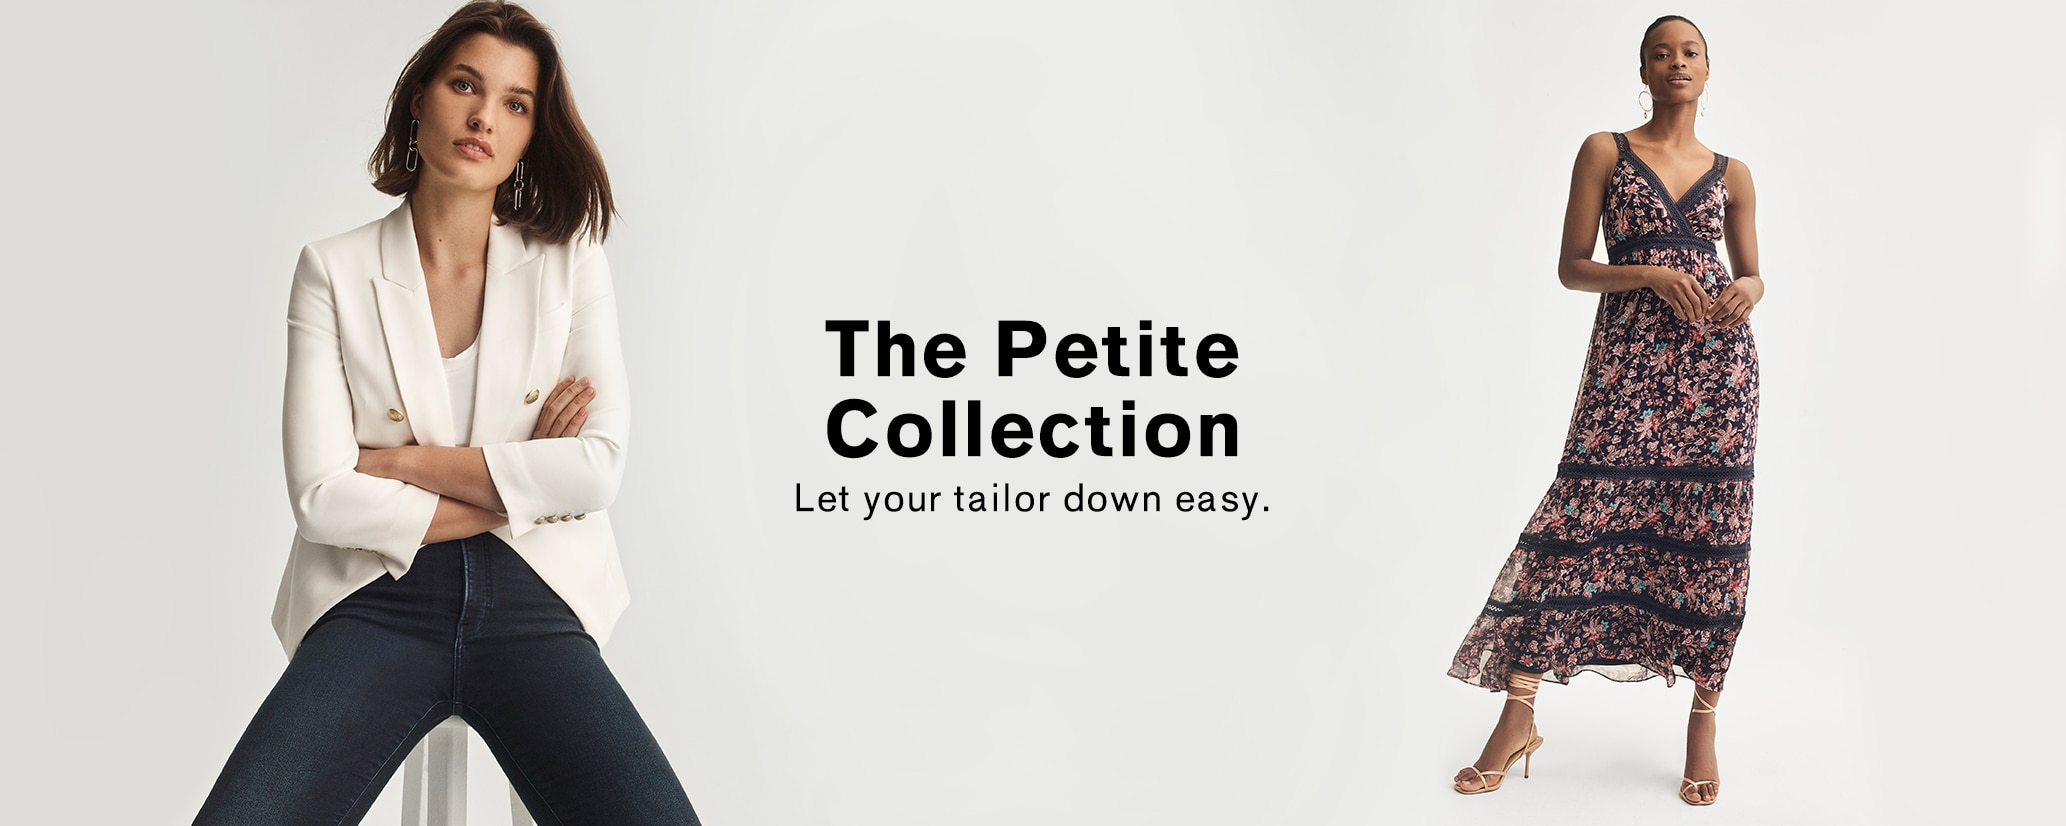 clothes for petite women